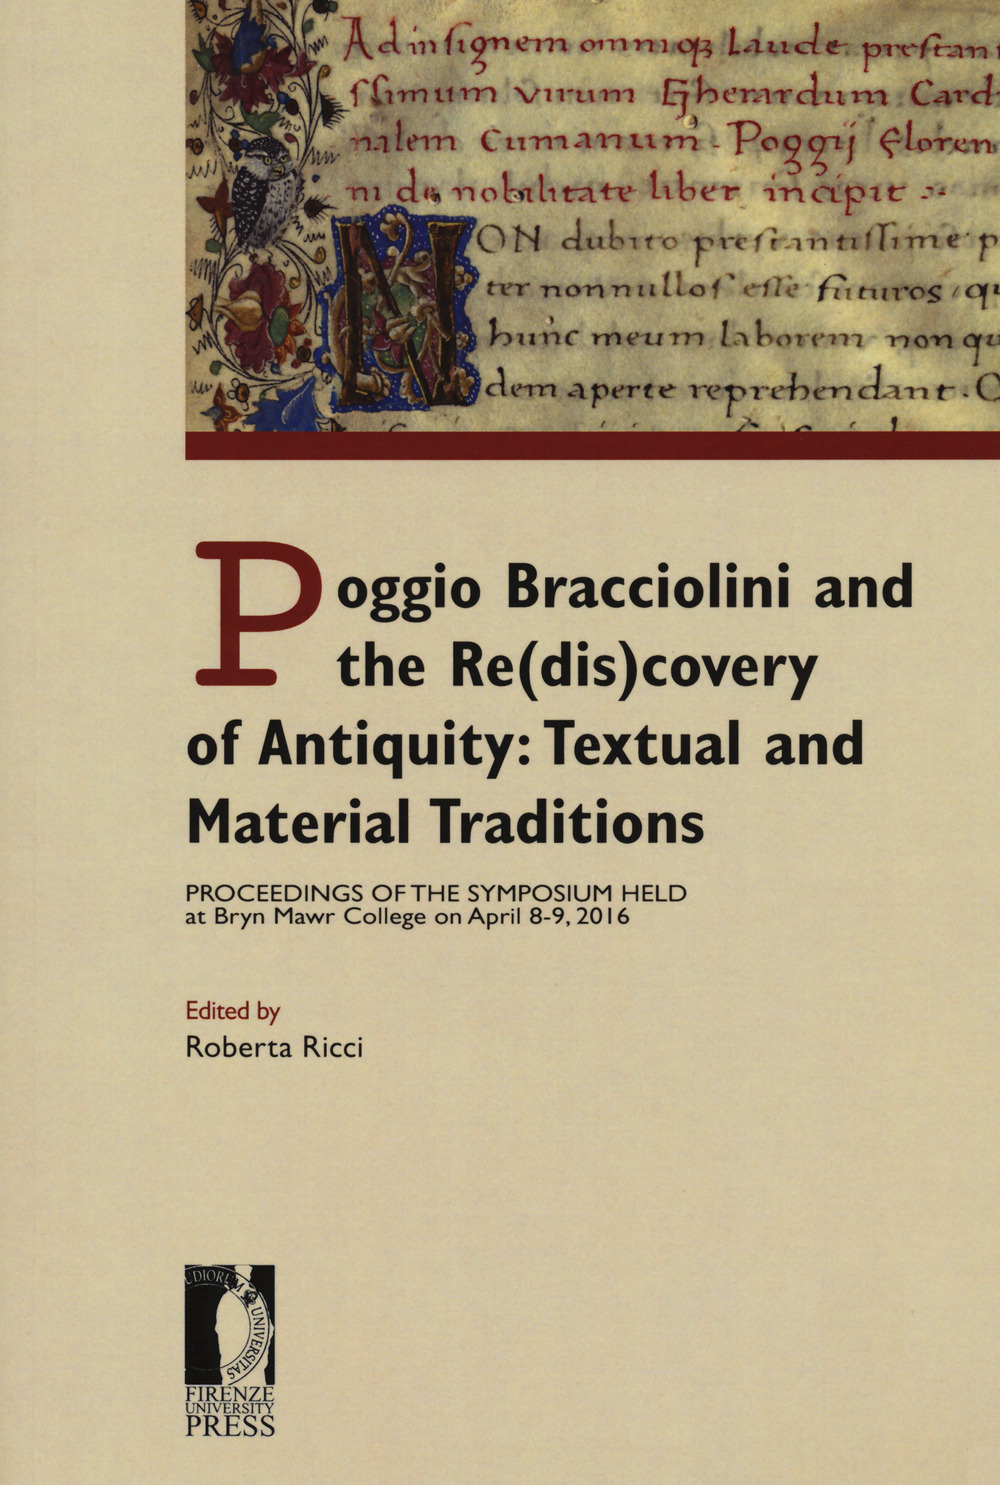 Poggio Bracciolini and the re(dis)covery of antiquity: textual and material traditions. Proceedings of the symposium held at Bryn Mawr College on April 8-9, 2016